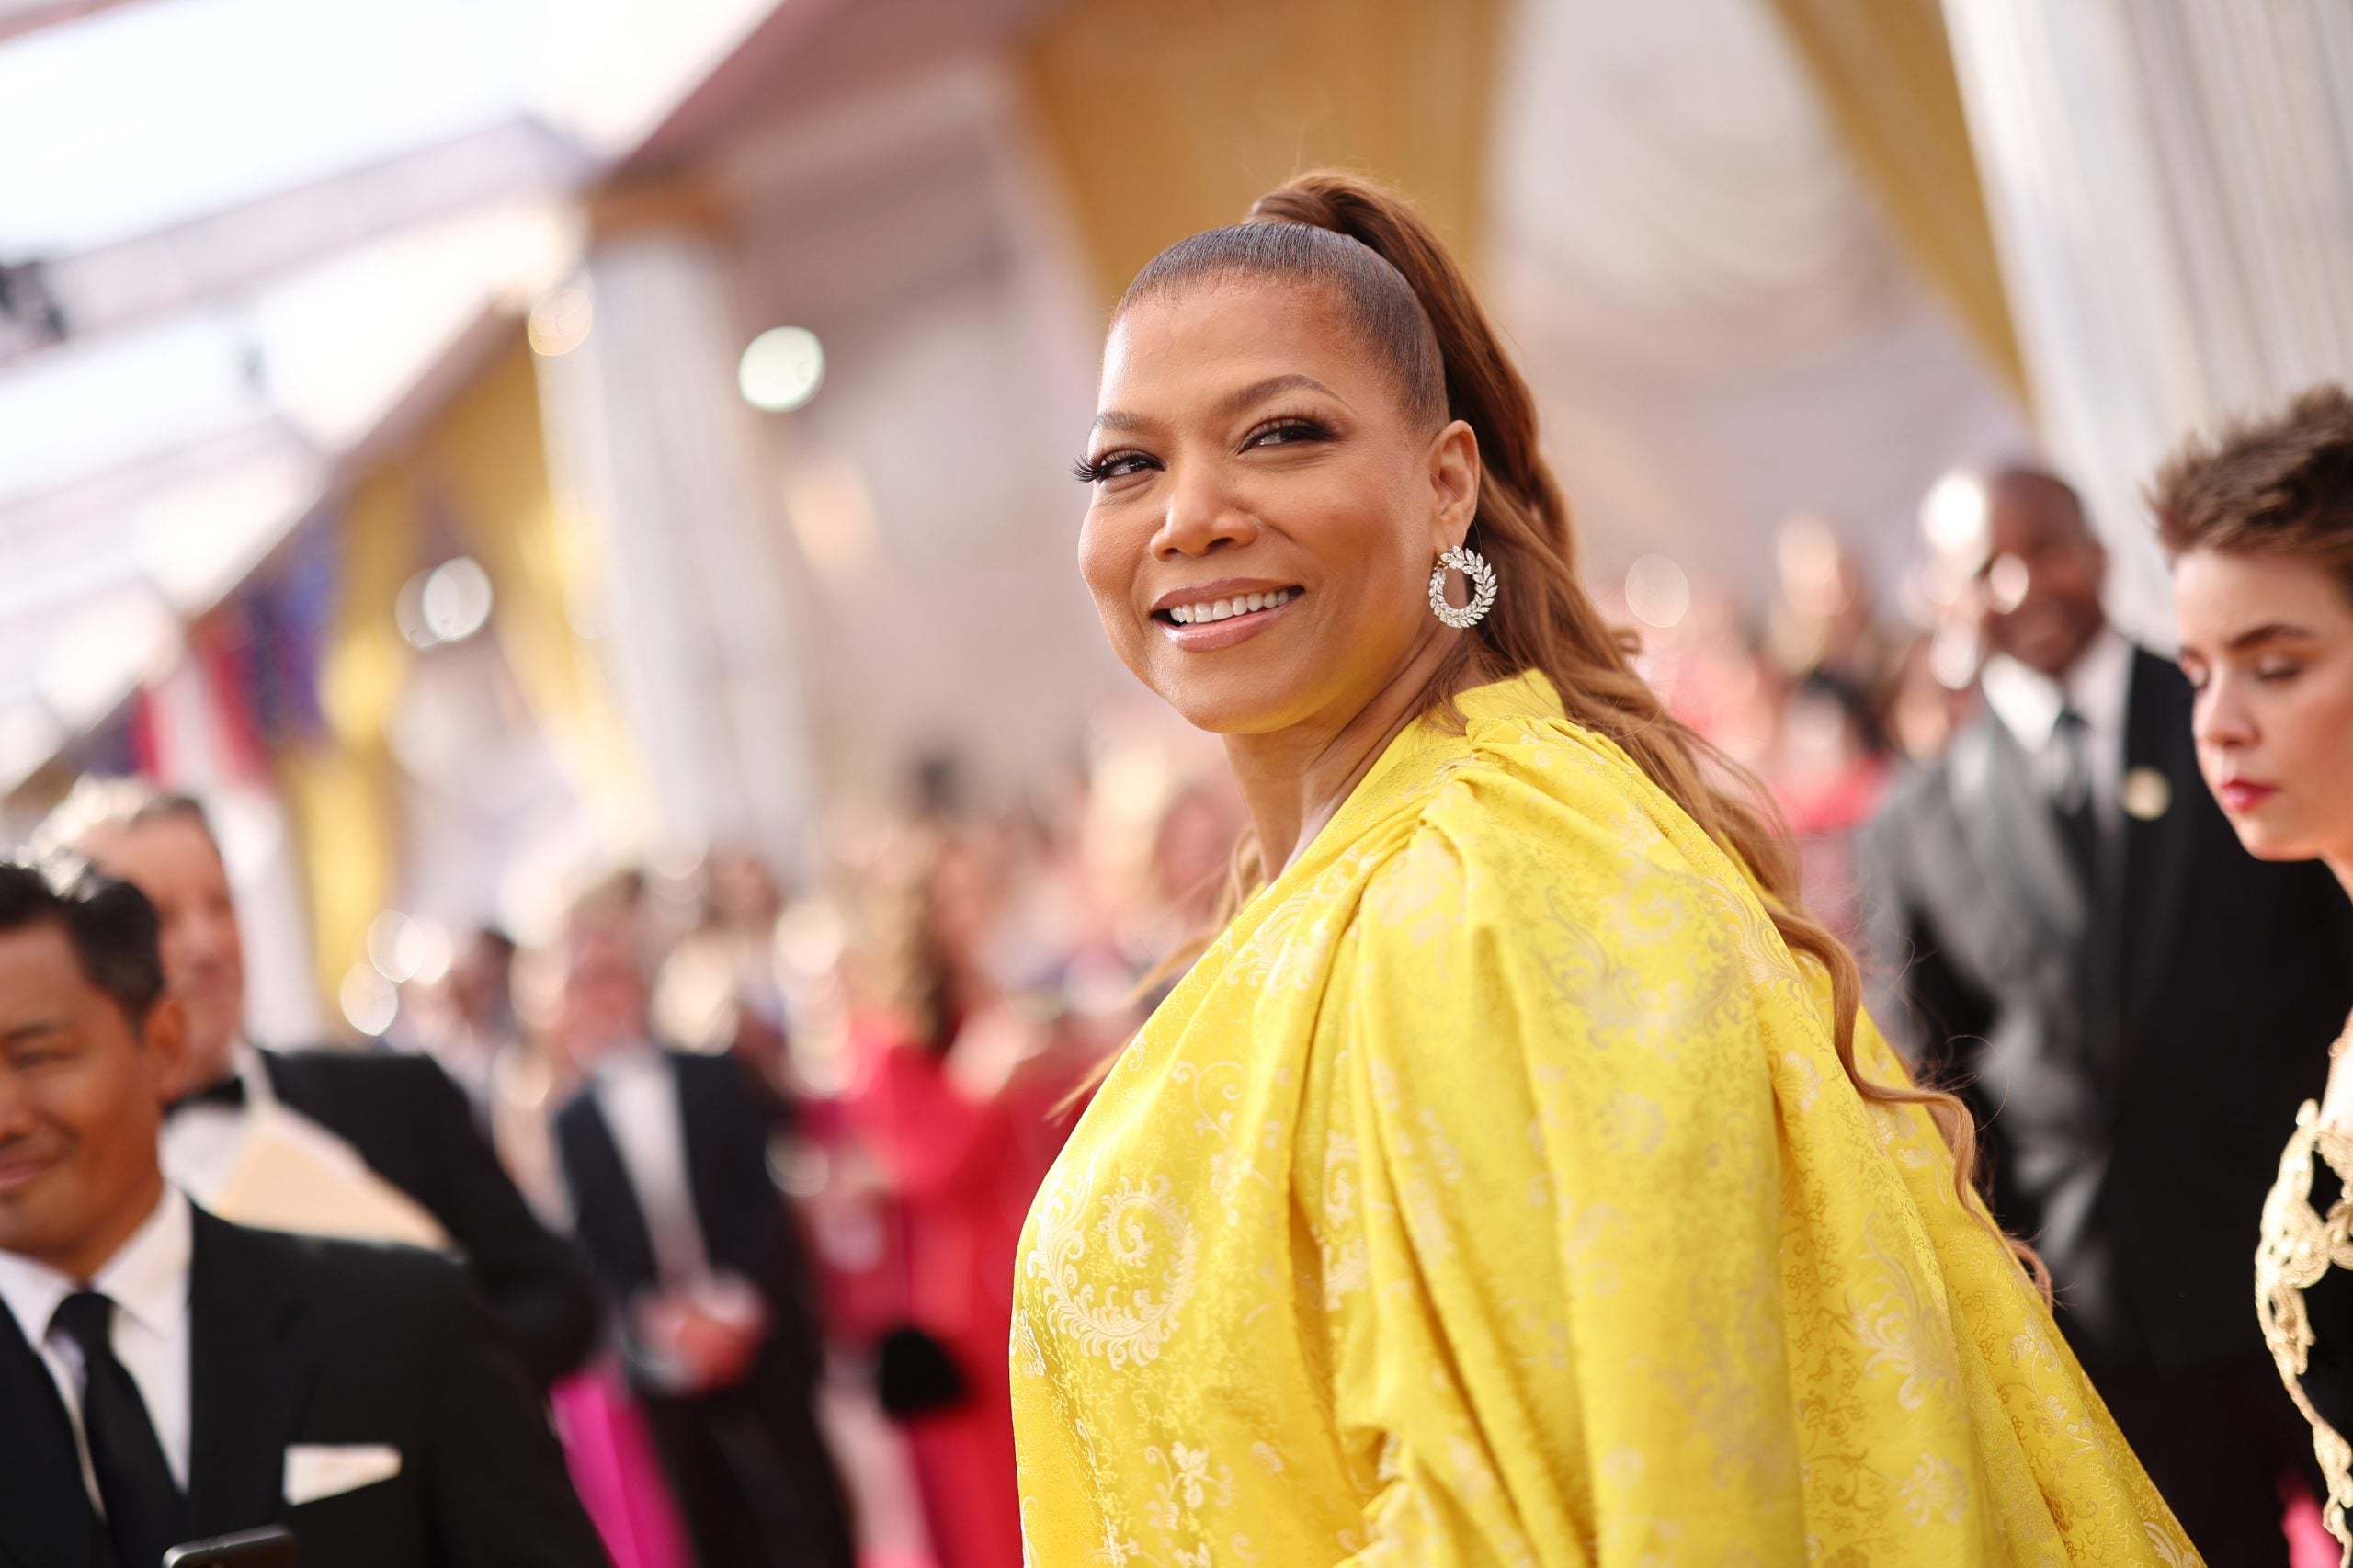 Queen Latifah Continues To Highlight Black Women In Filmmaking With The Queen Collective